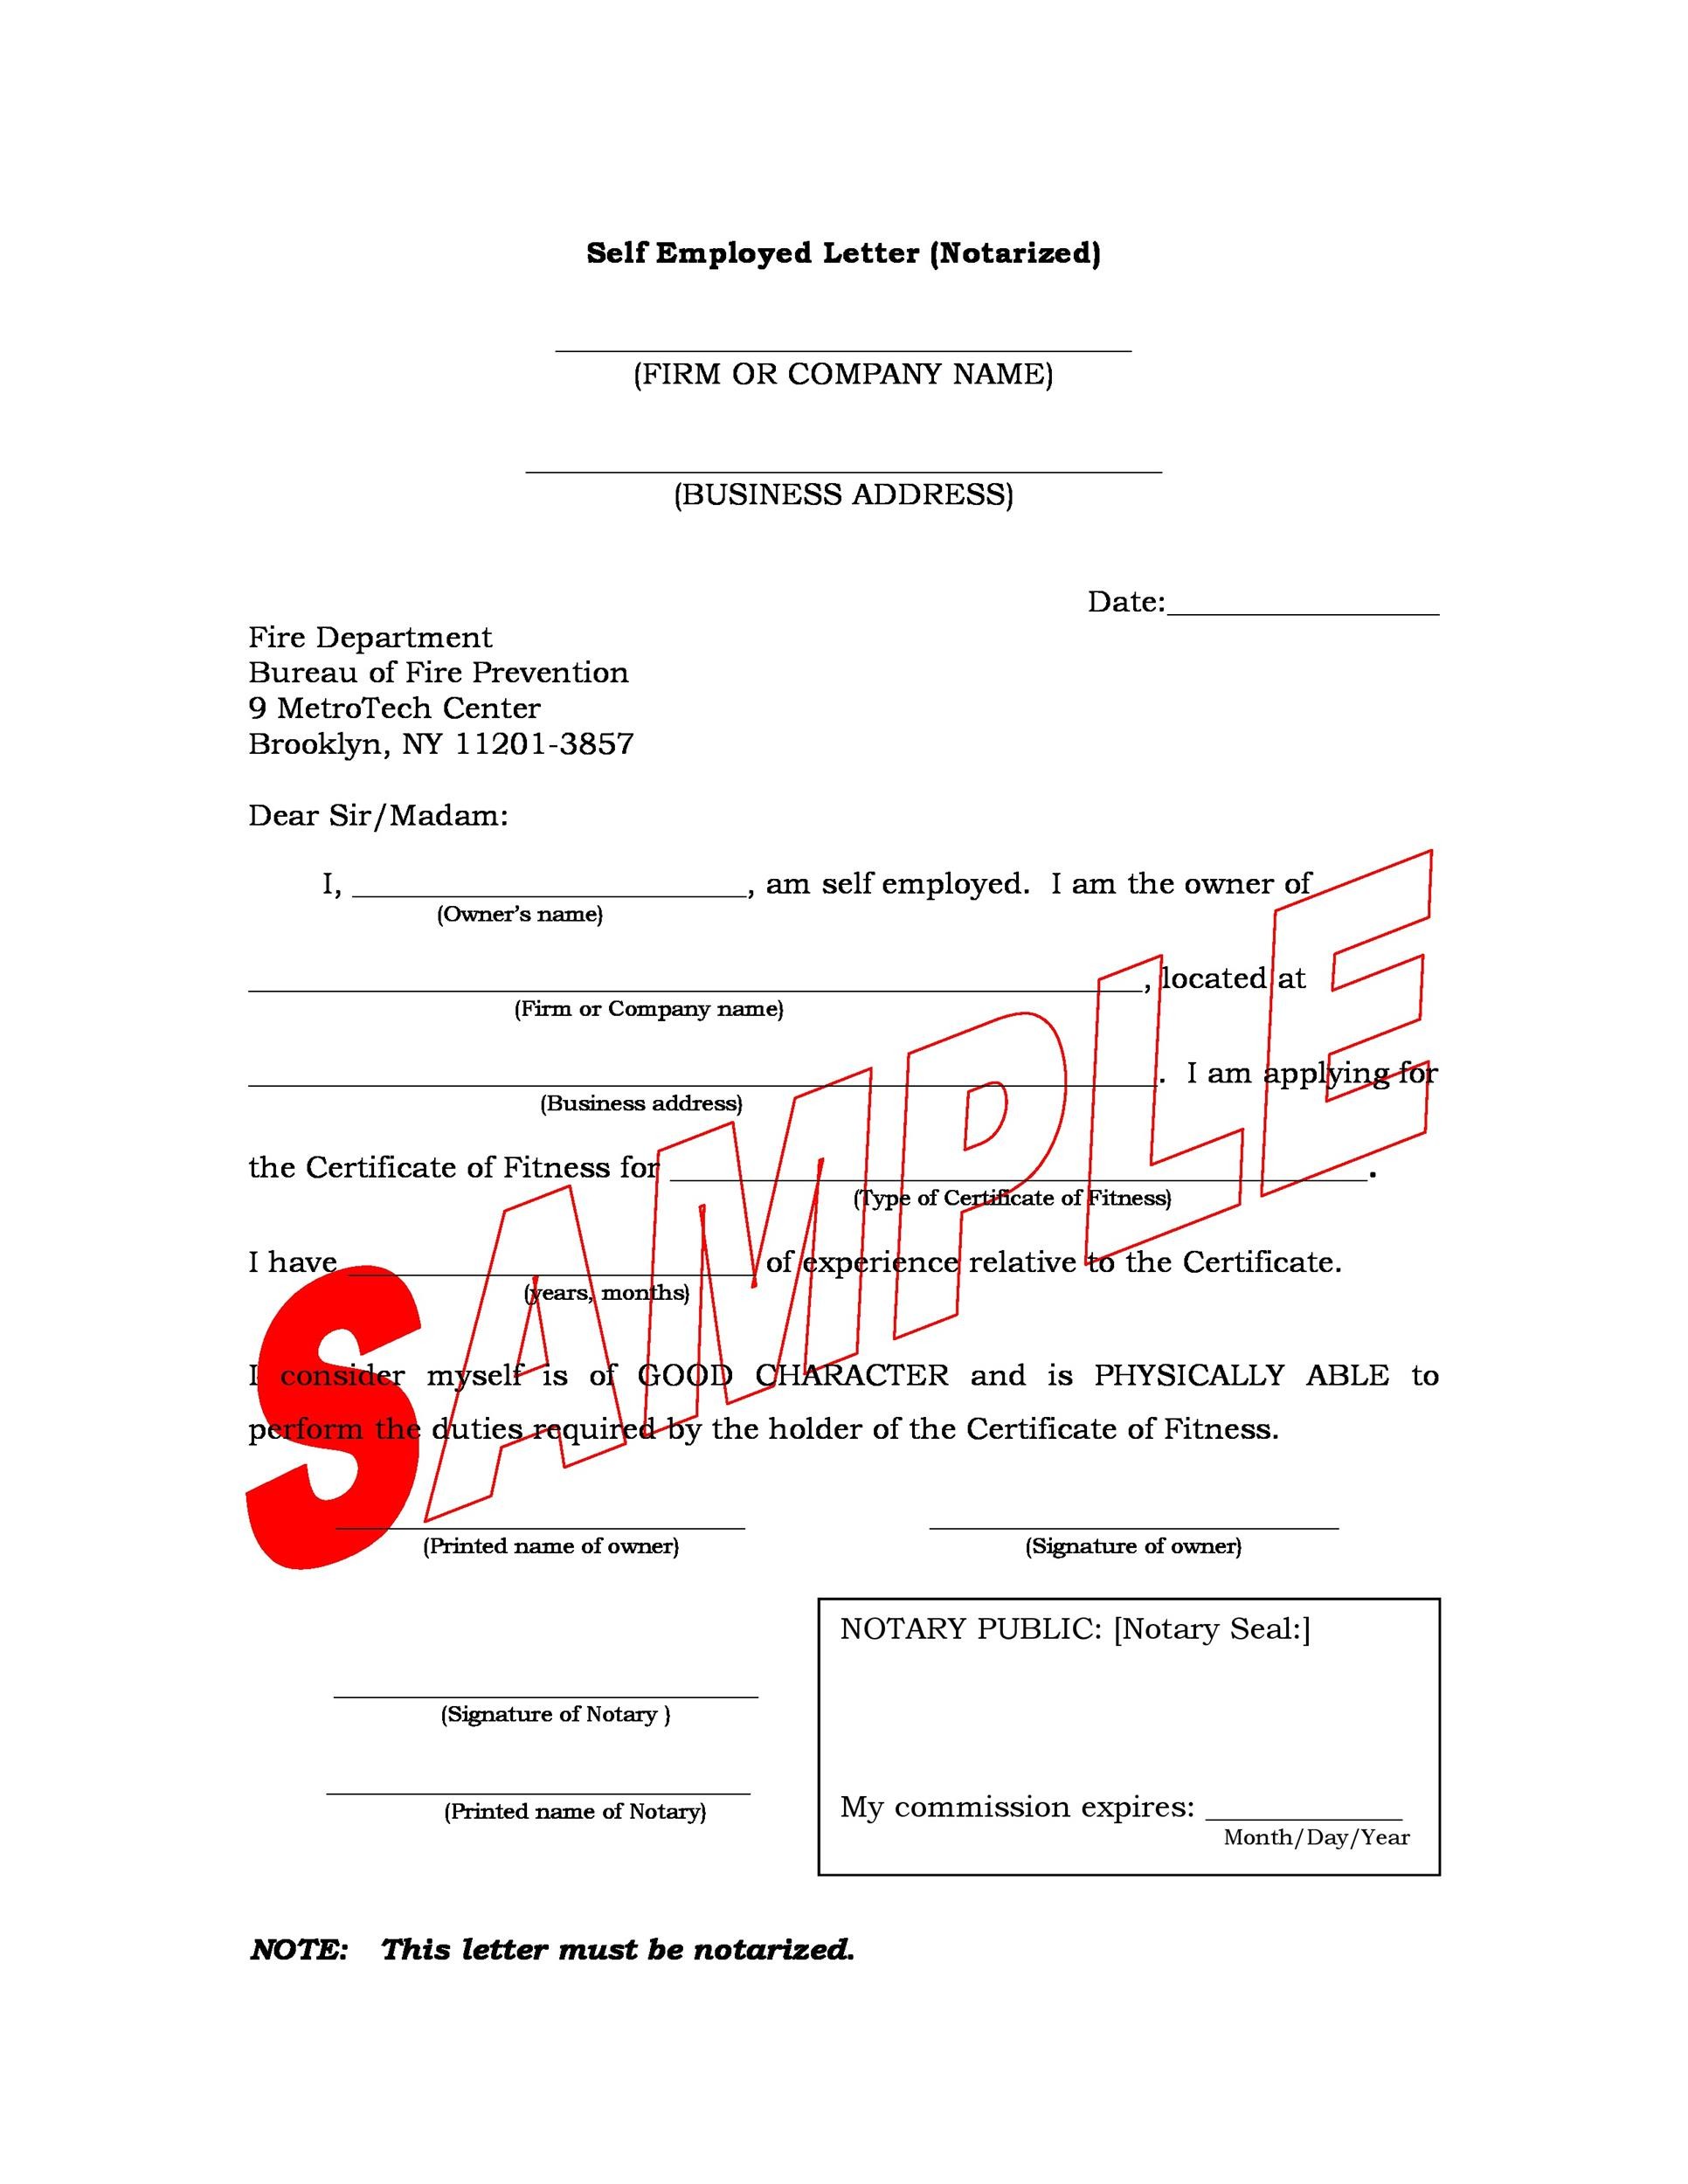 30 Professional Notarized Letter Templates TemplateLab